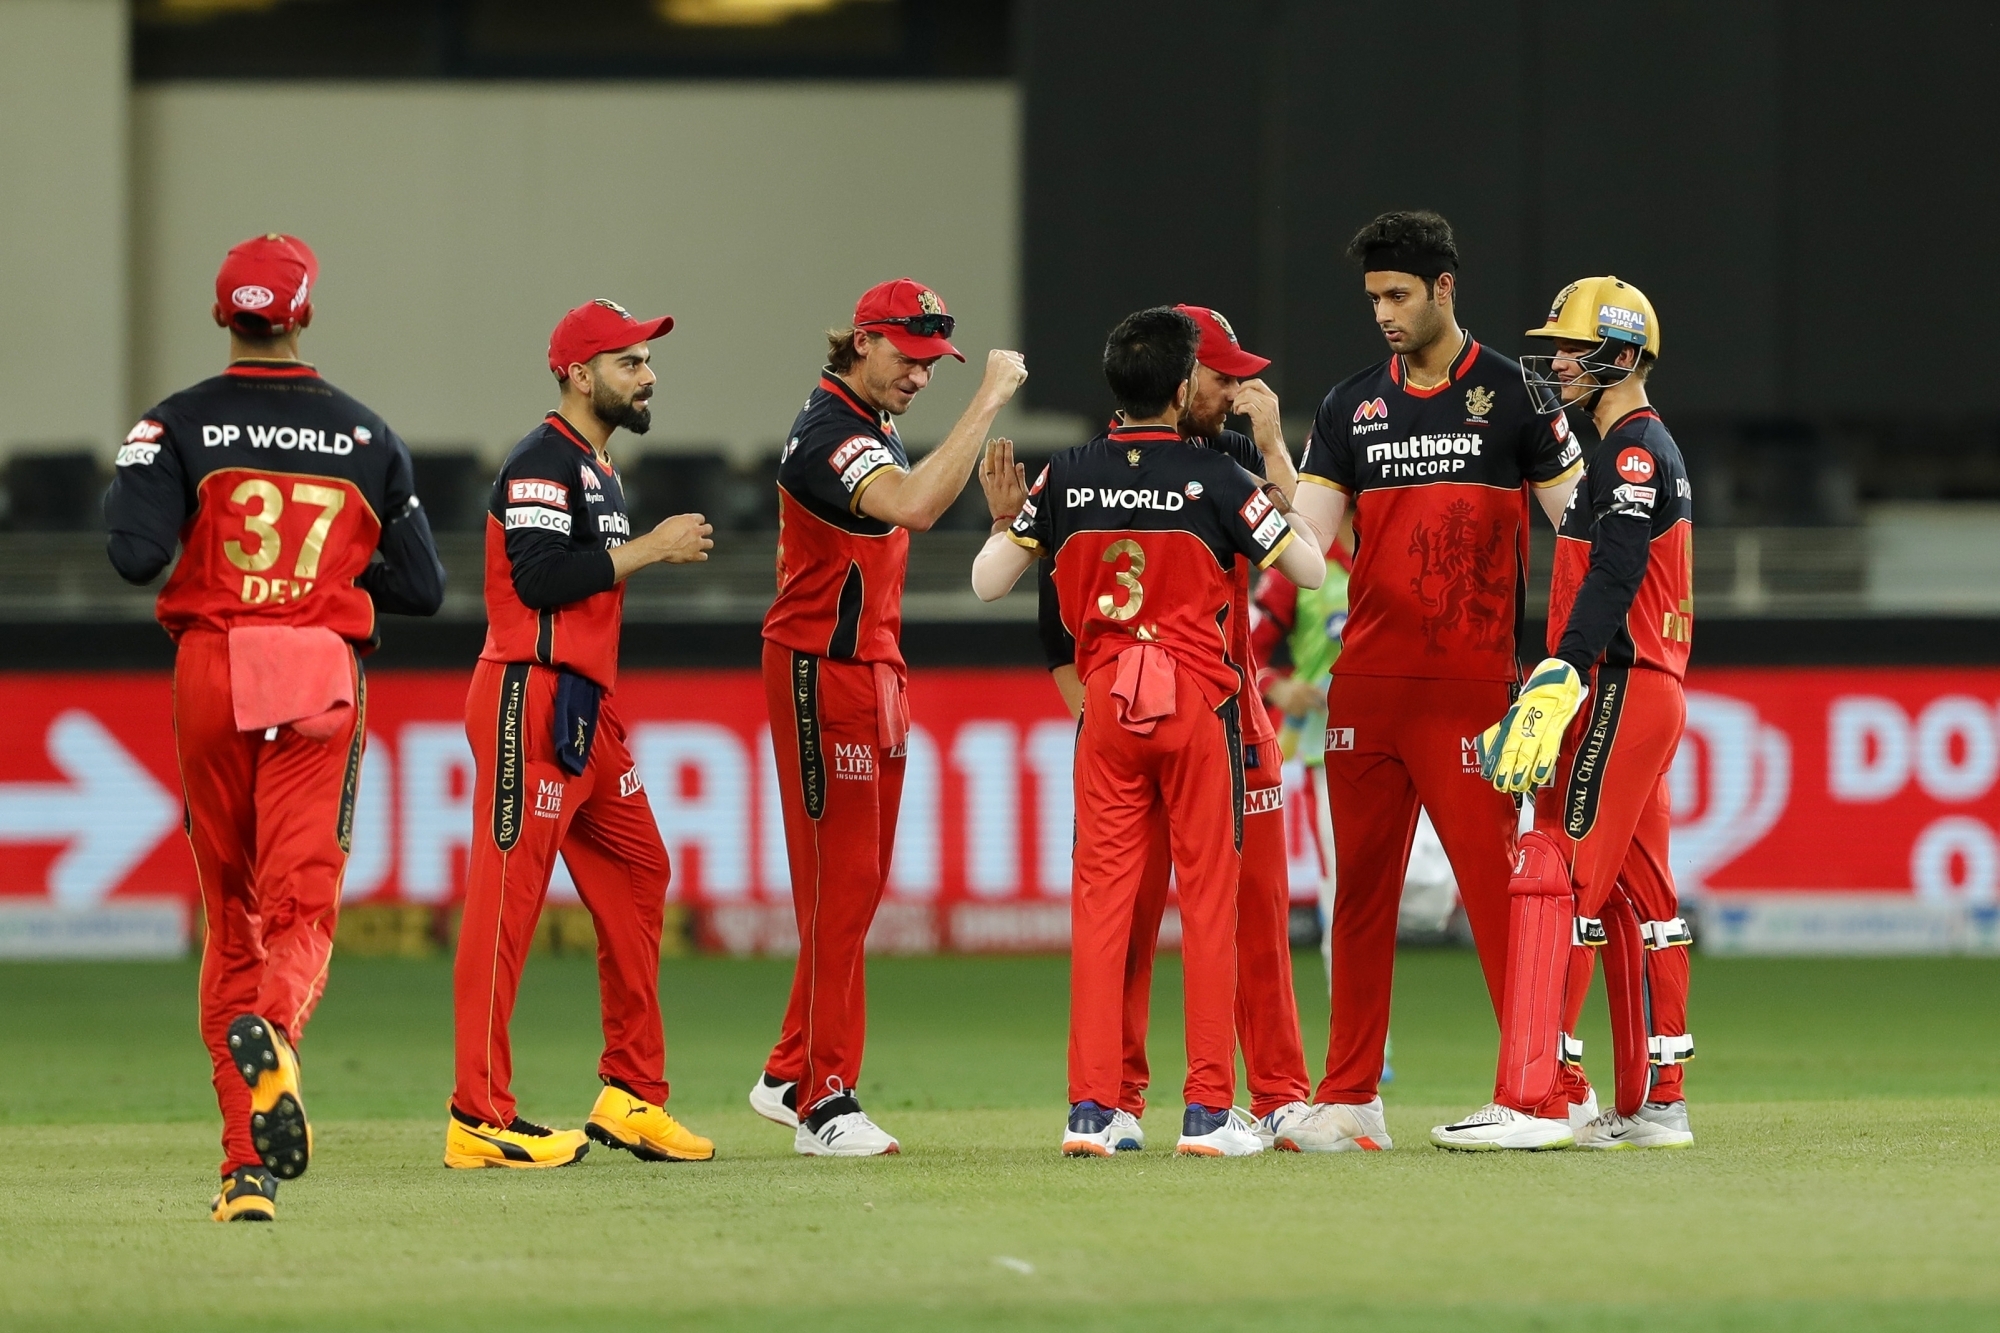 RCB lost five straight matches on their way out of IPL 13 | BCCI/IPL